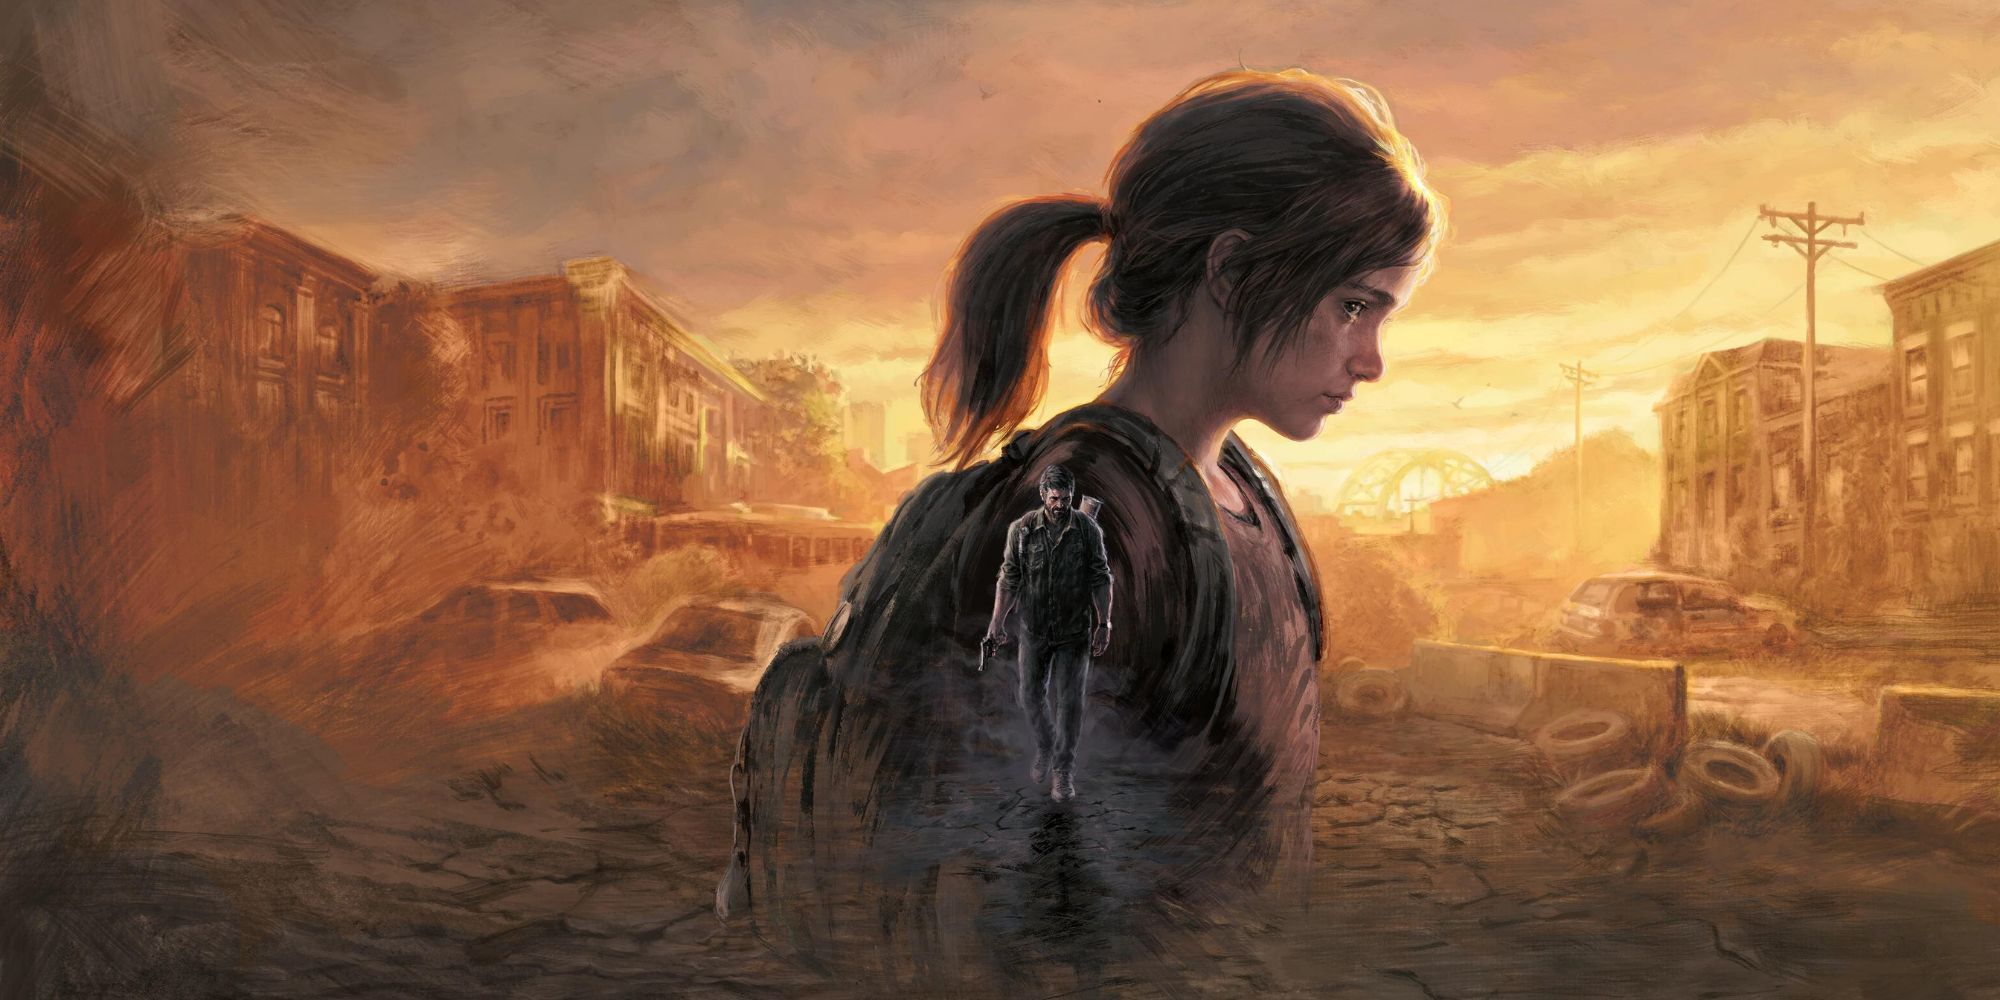 Joel walks down an abandoned road while Ellie's portrait hovers over him